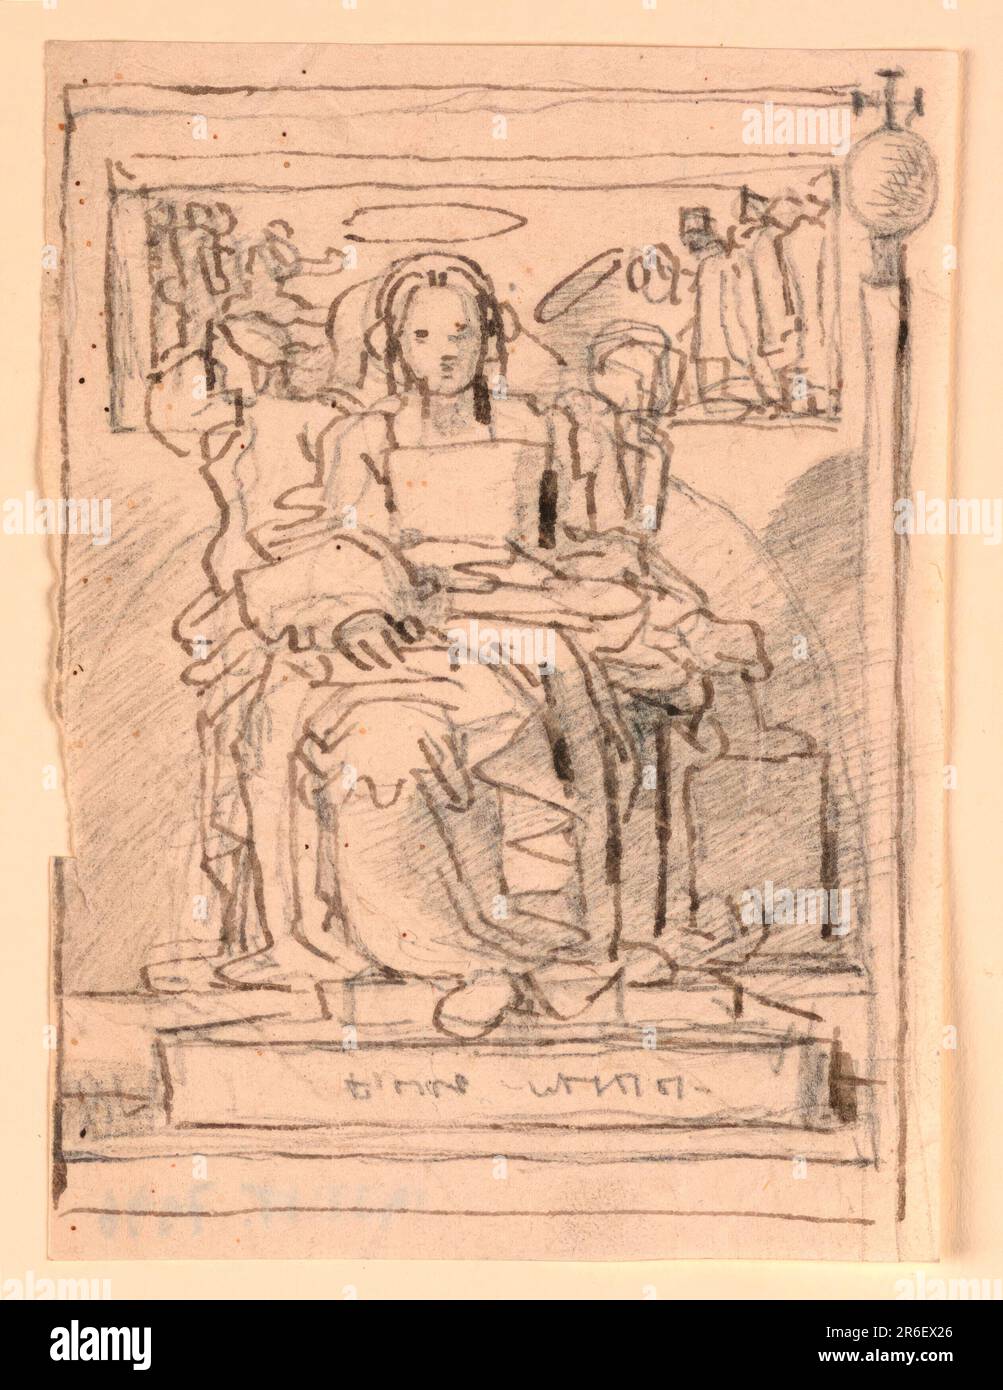 The Virgin and Child enthroned with figures above. Graphite, pen and ink on paper. Date: 1820-1850. Museum: Cooper Hewitt, Smithsonian Design Museum. Stock Photo